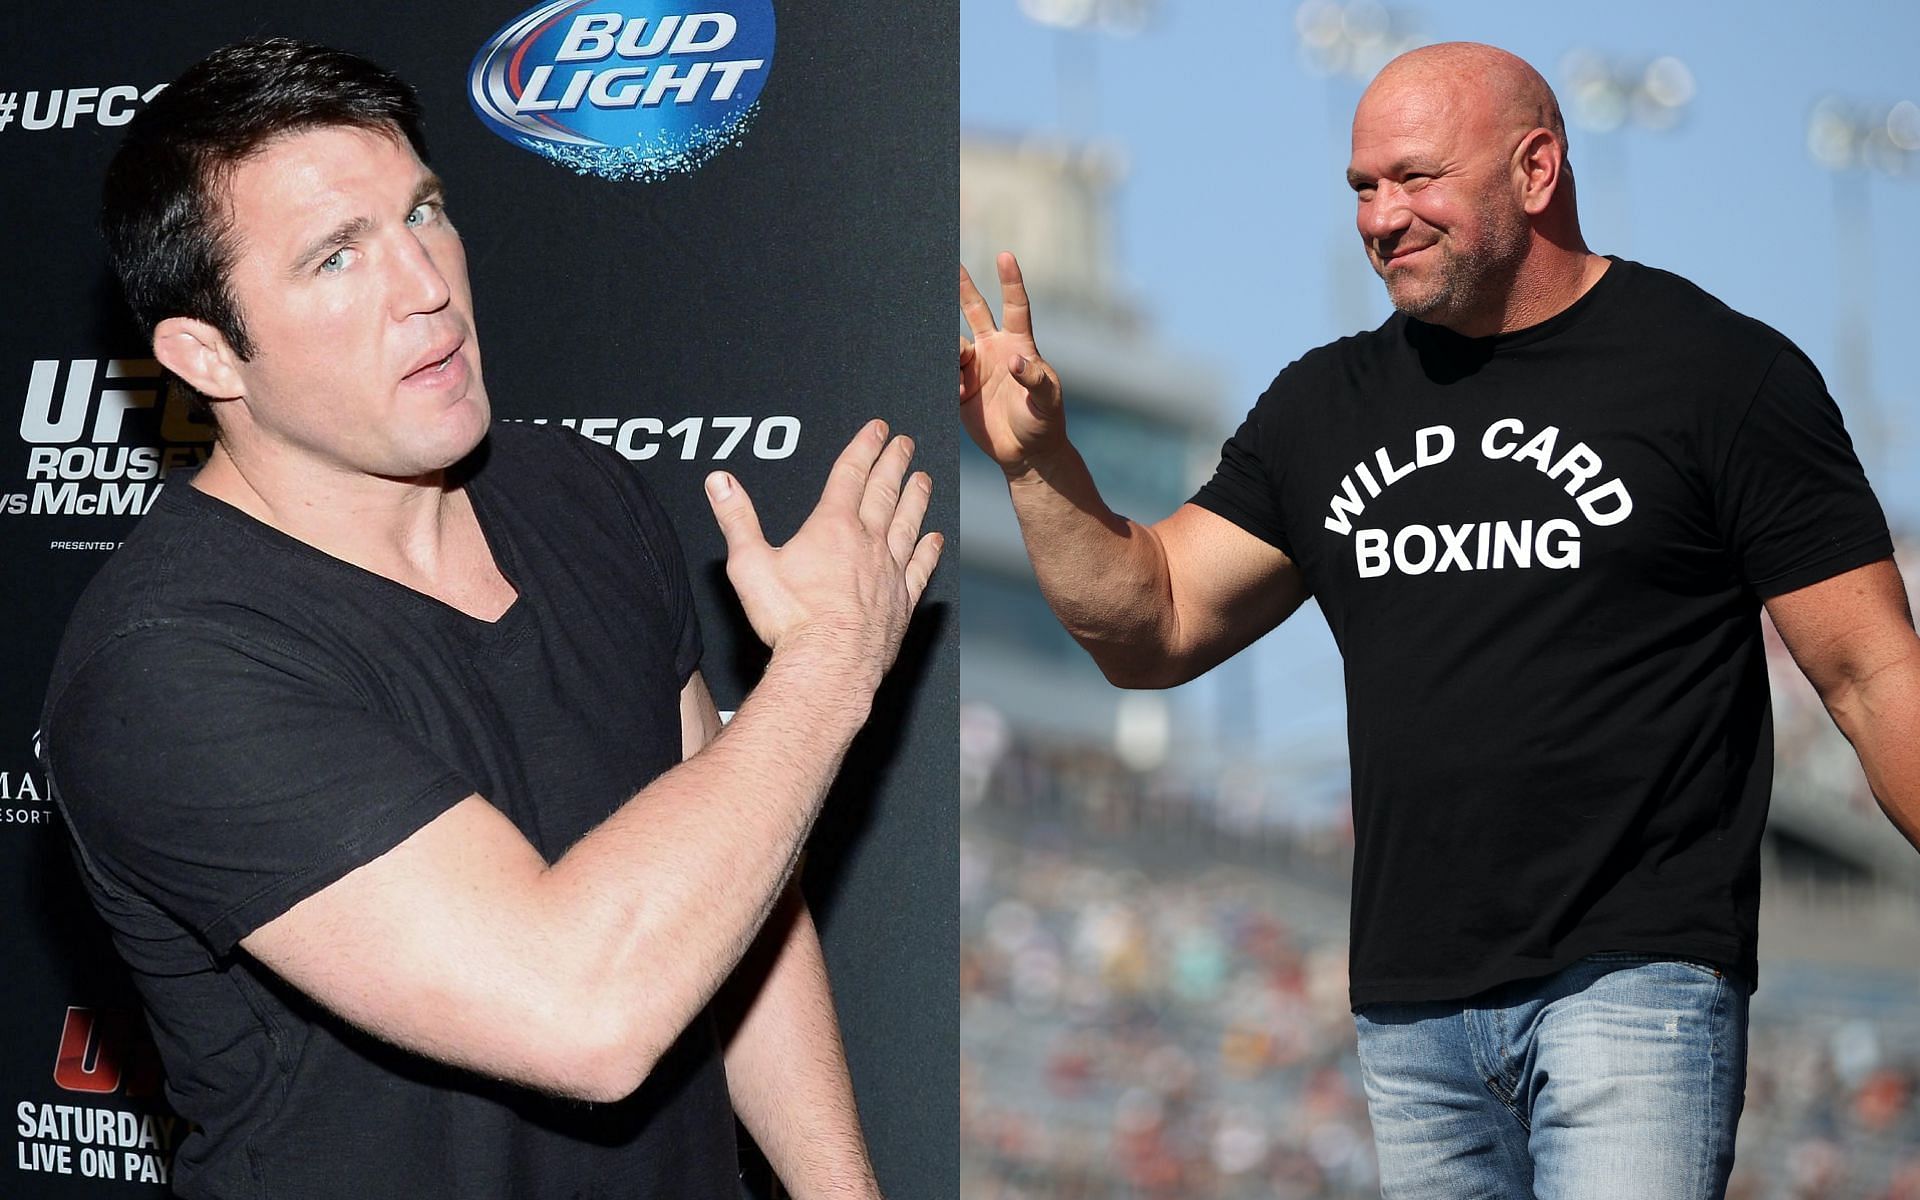 Chael Sonnen and Dana White [Image credits: Getty Images] 